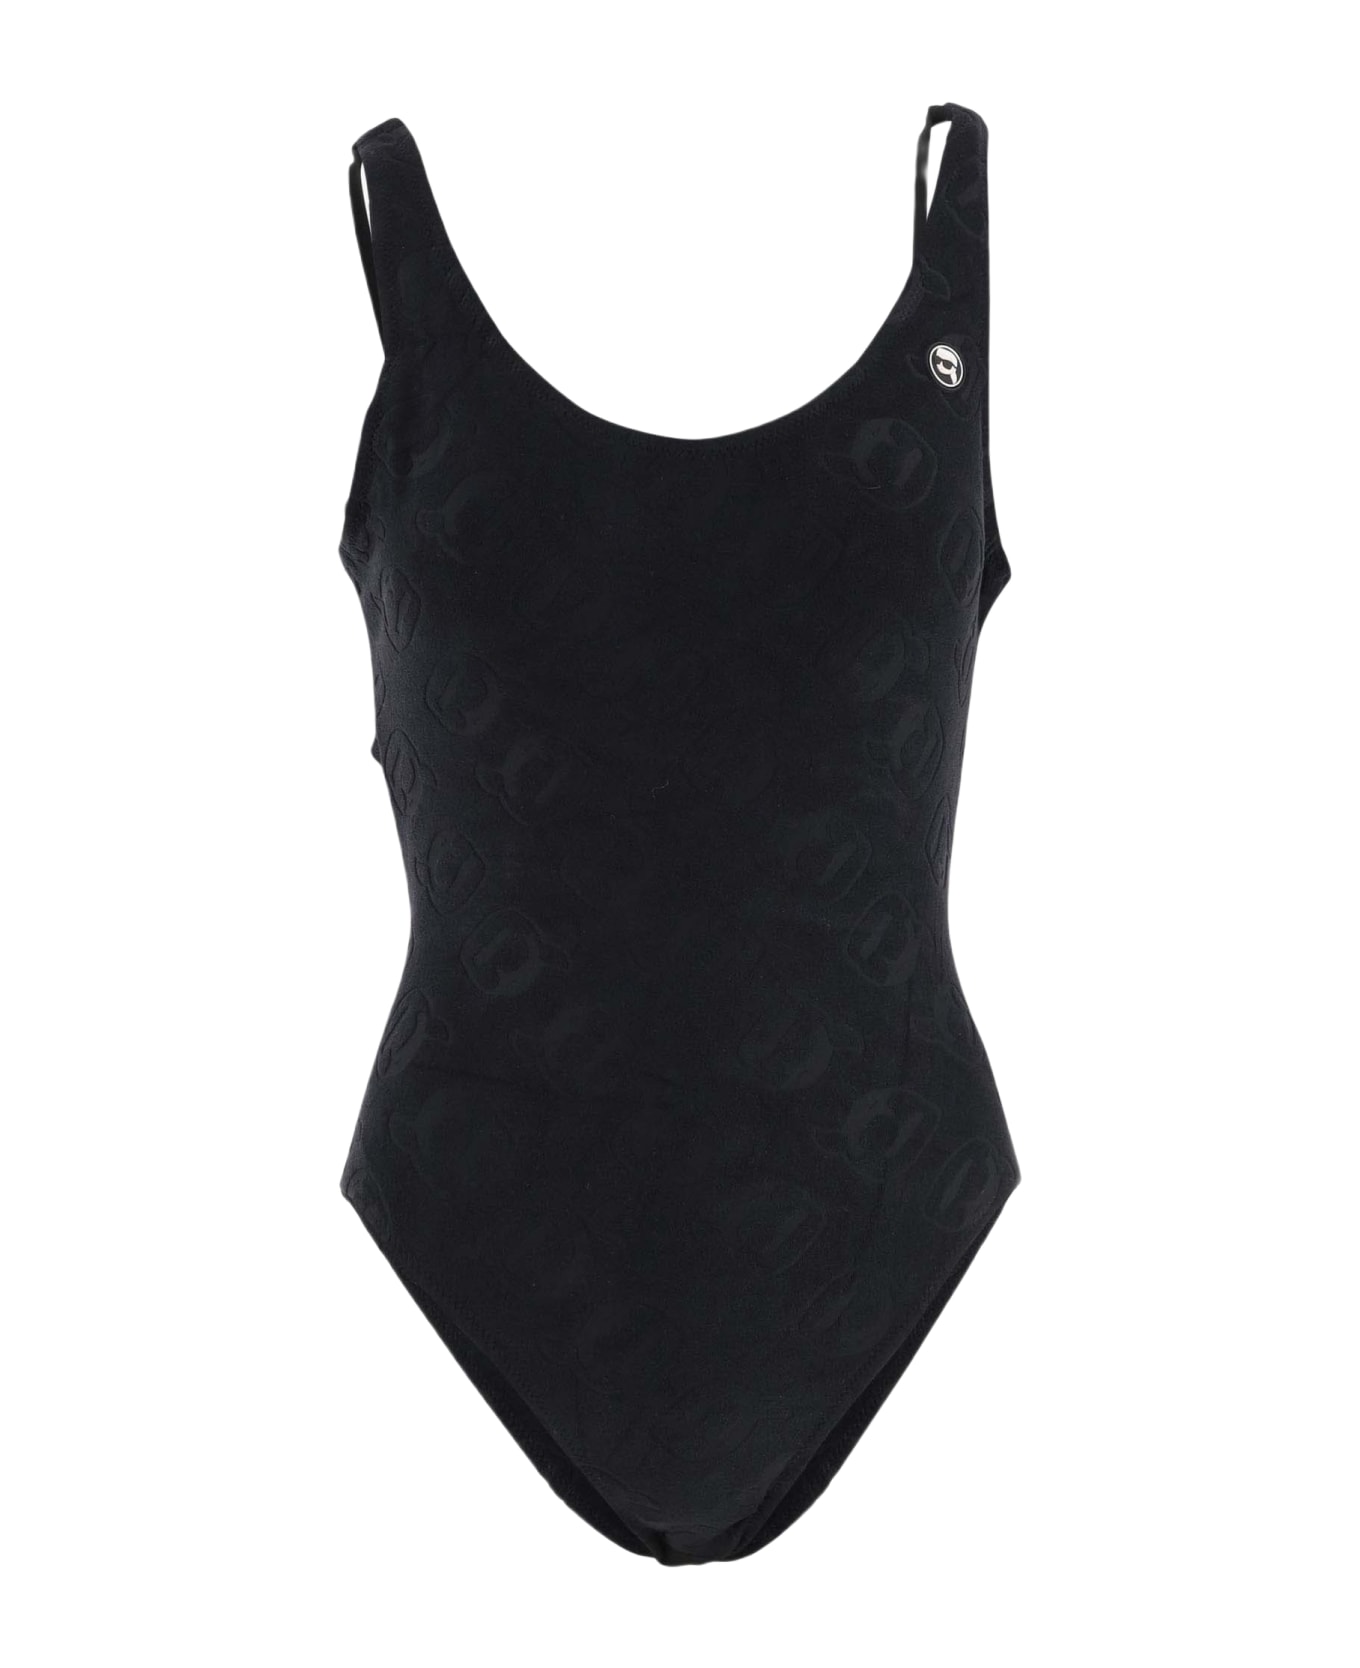 Karl Lagerfeld One Piece Swimsuit With Logo - Black